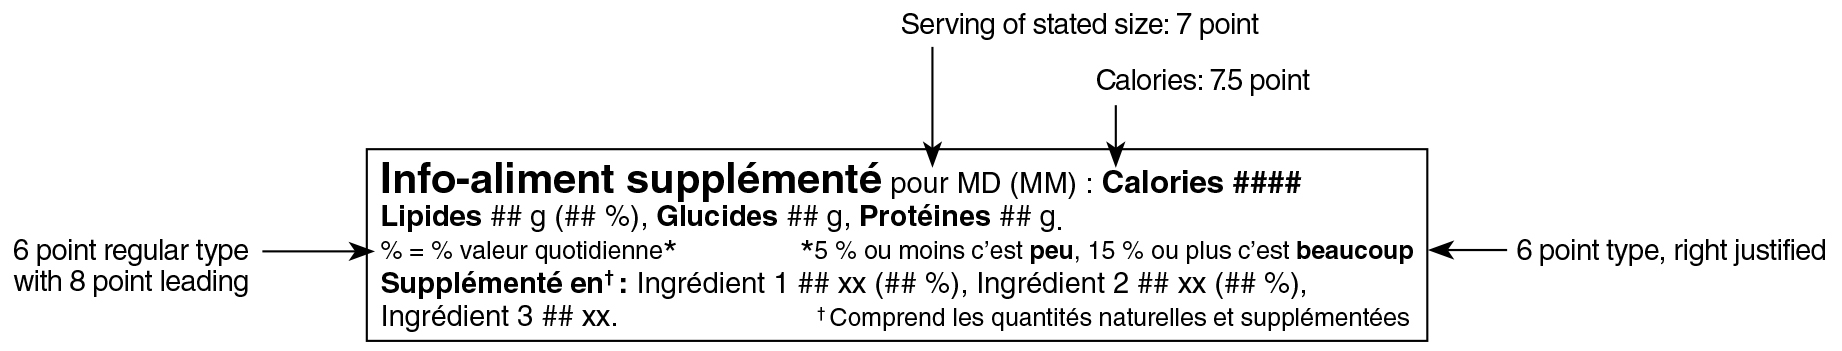 A French Supplemented Food Facts table in simplified linear format for one serving surrounded by specifications. Text version below.